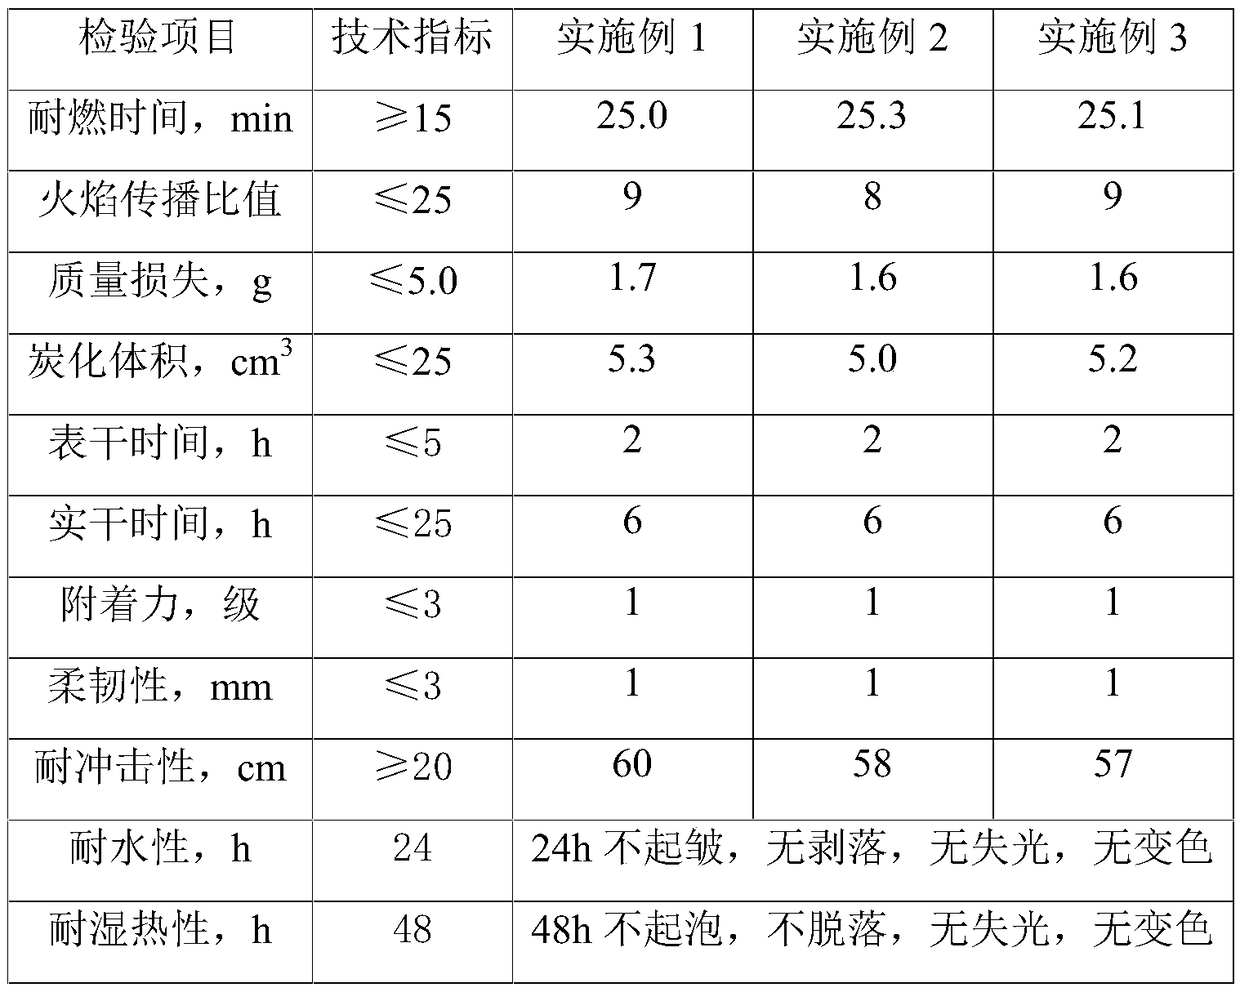 Expansive waterborne fireproof and flame-retardant coating for wood material and preparation method of expansive waterborne fireproof and flame-retardant coating